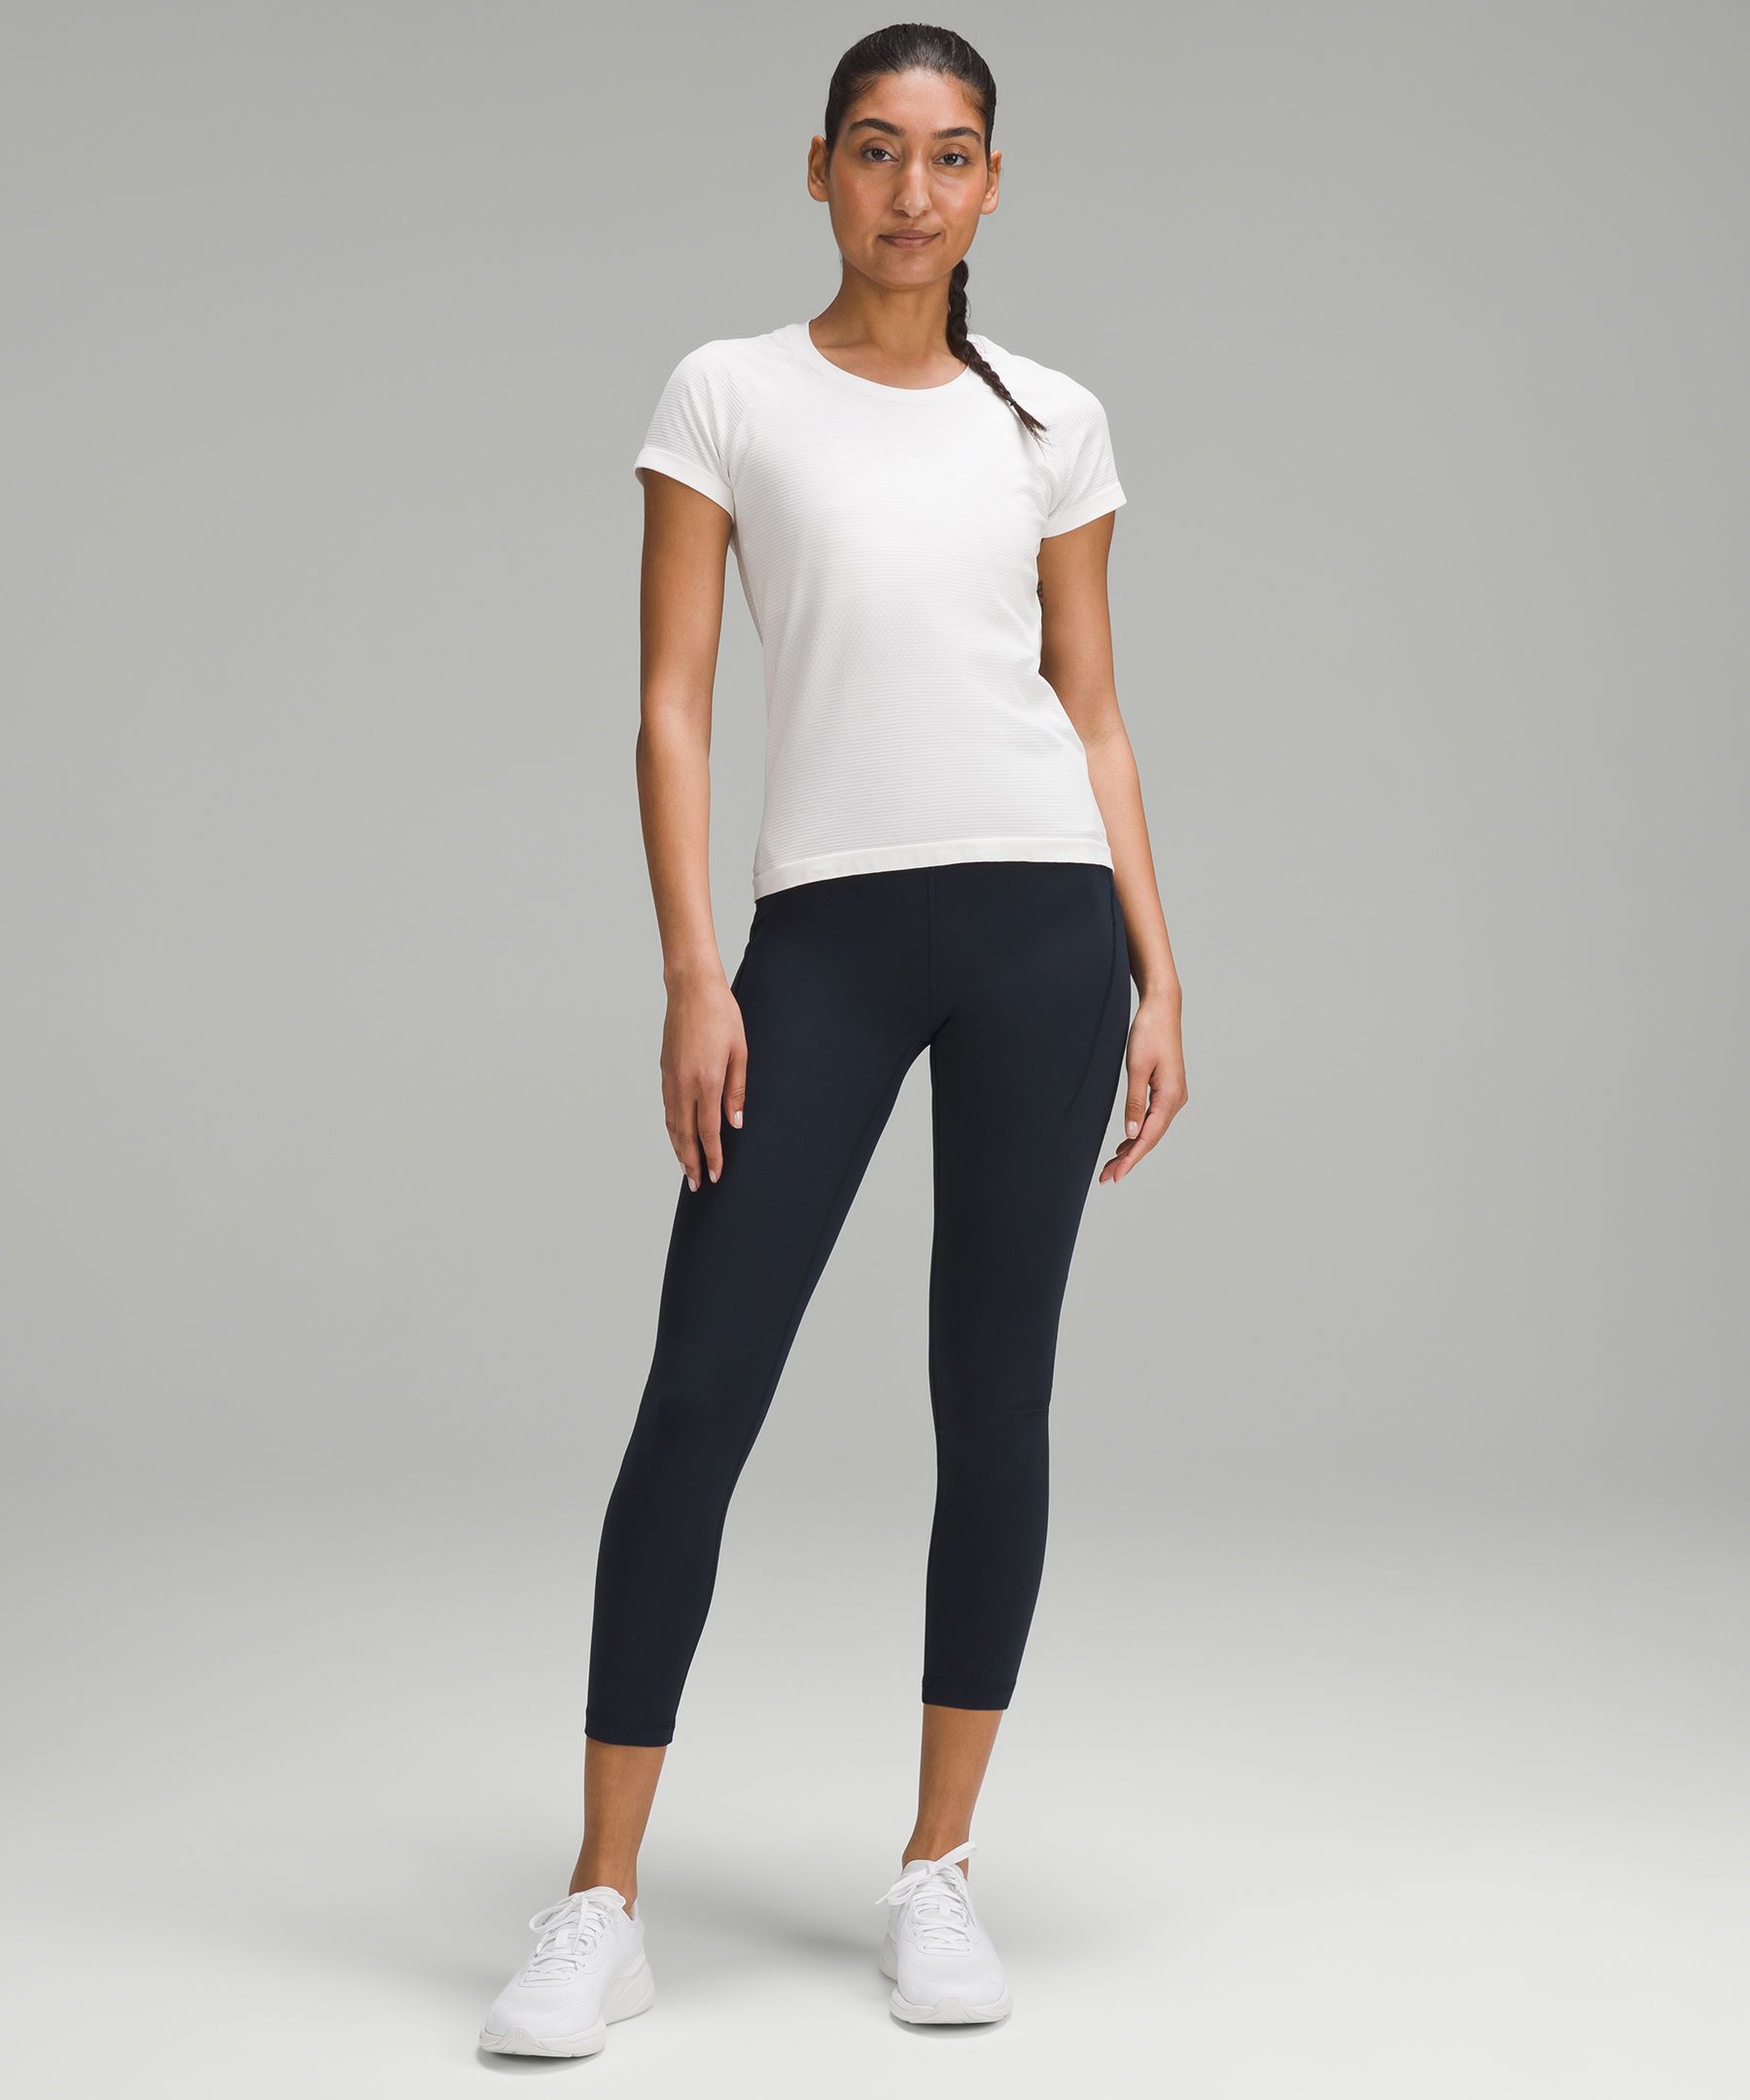 Lululemon NWT Wunder Train High-Rise Tight with Pockets 25 - Chambray Size  4 - $121 New With Tags - From A